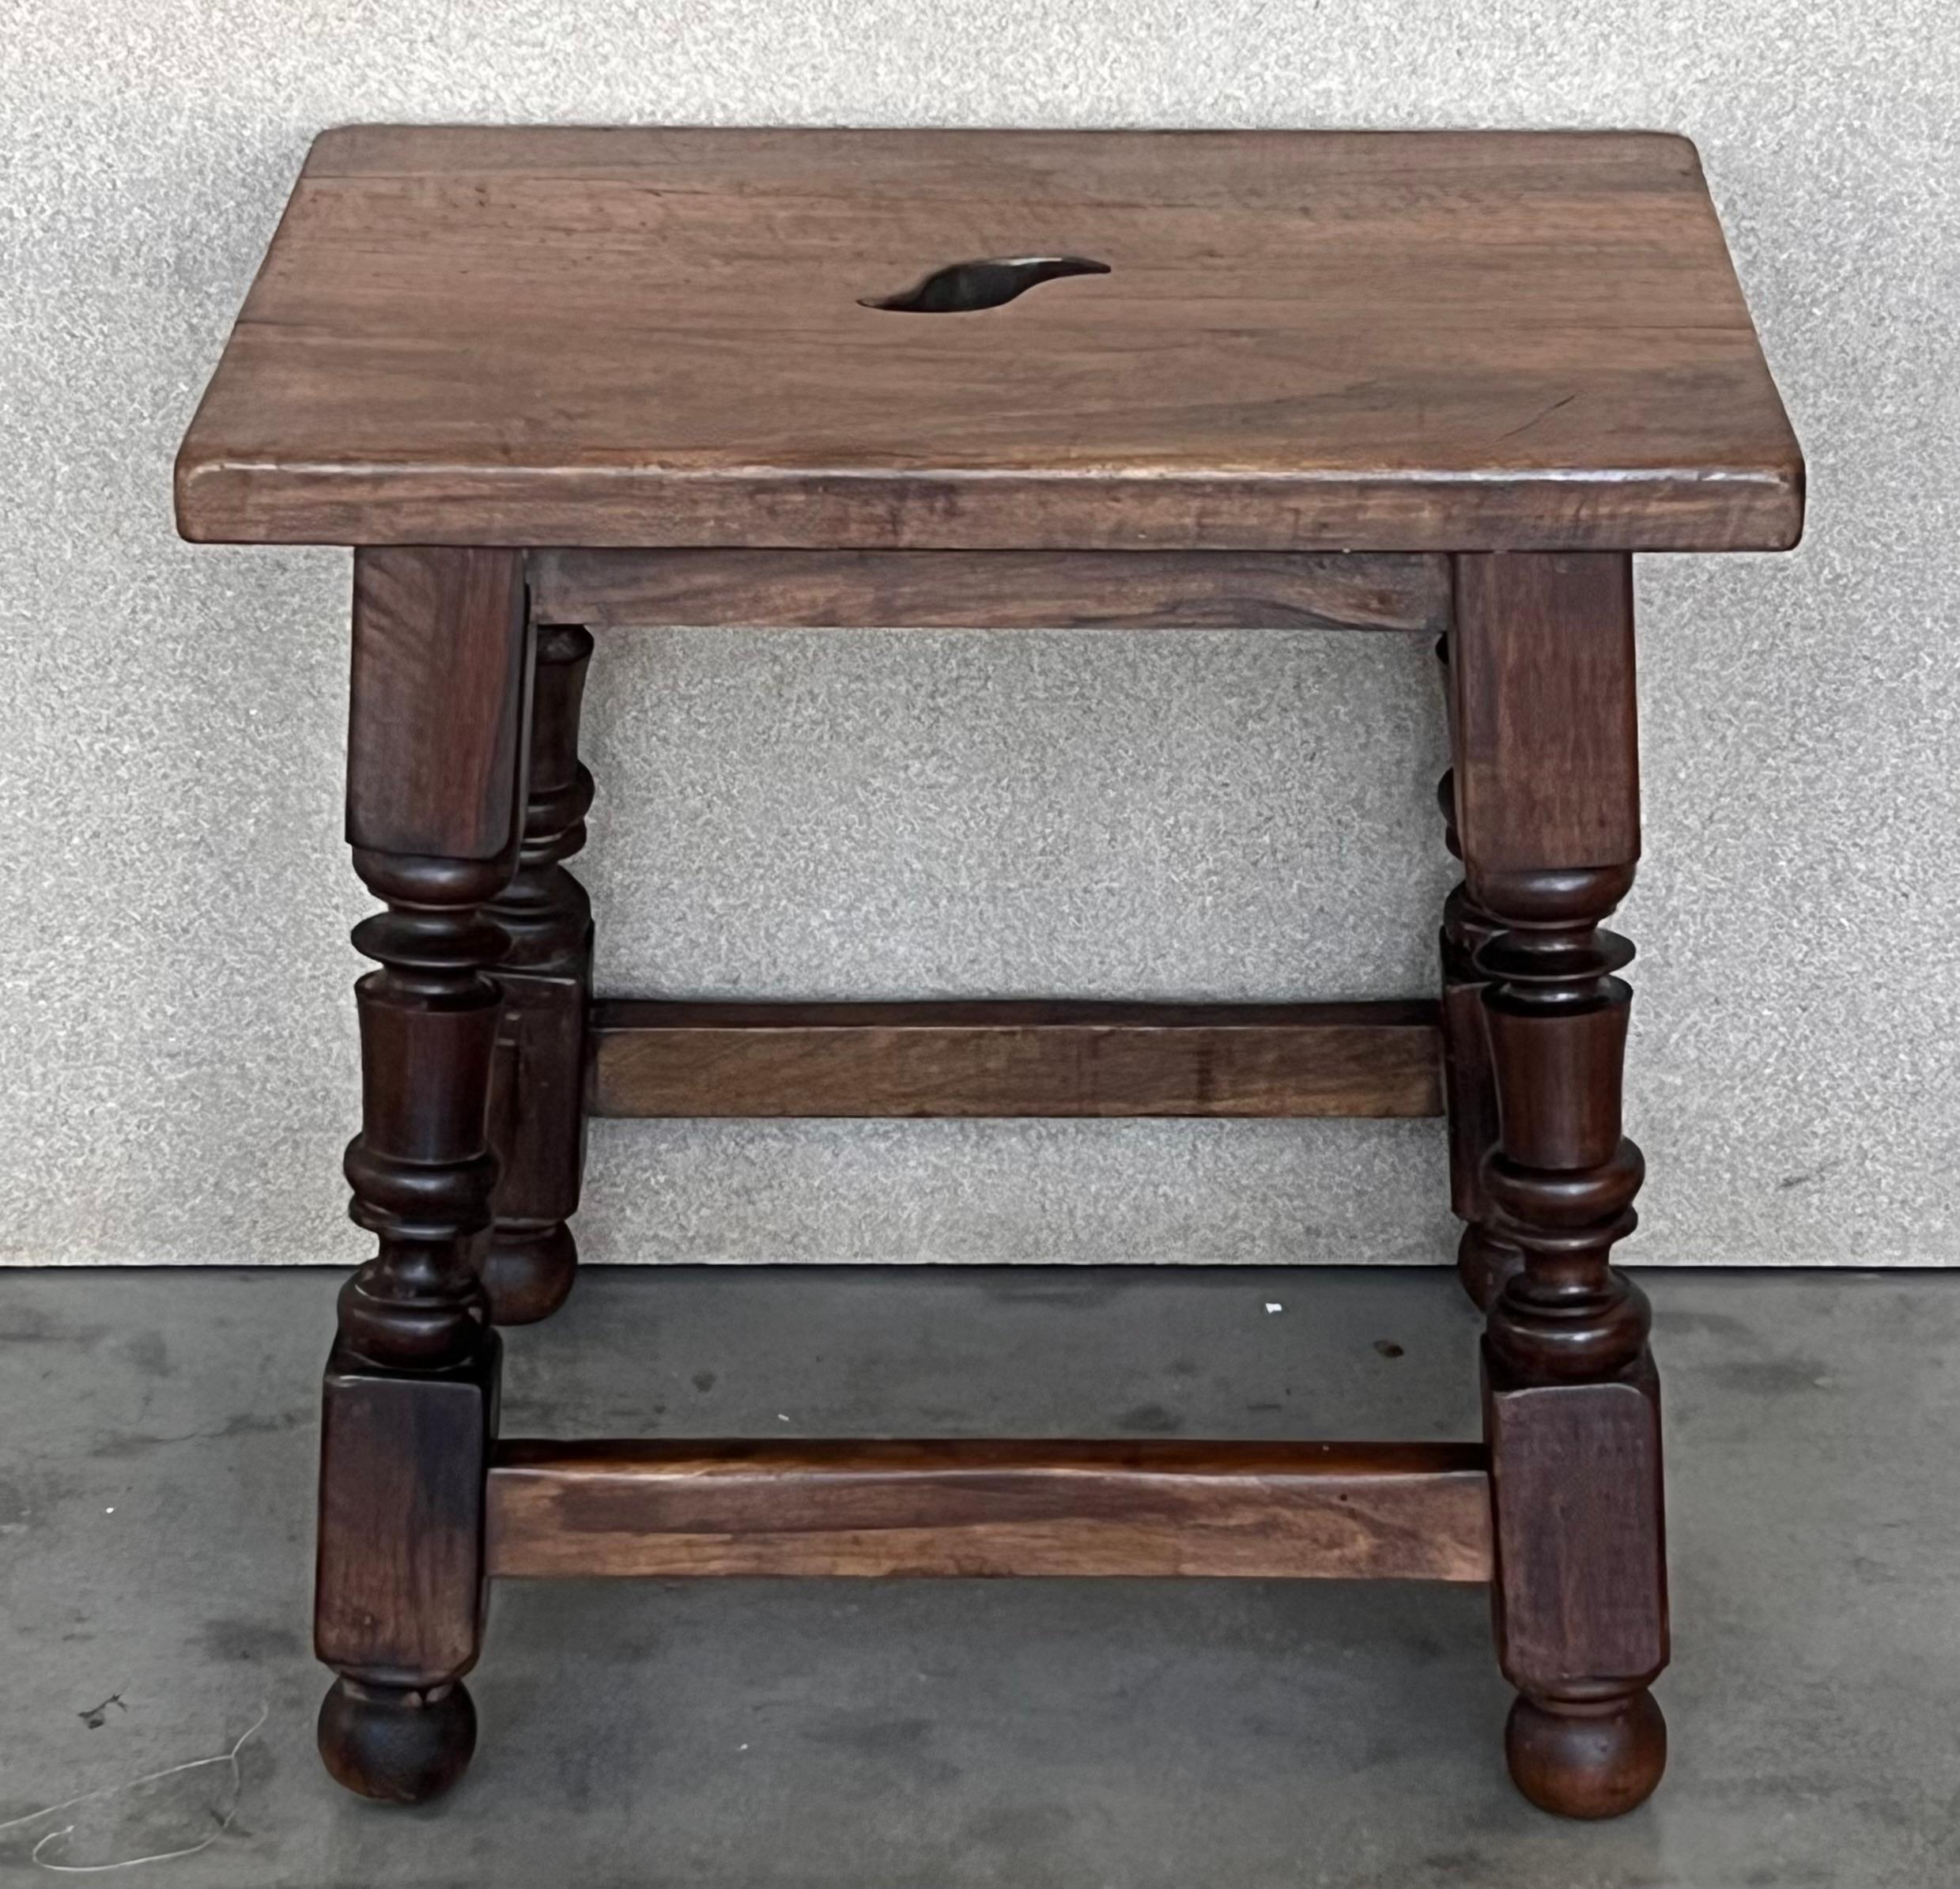 19th century English oak joint stool / bench   
Jacobean style stool / bench  
Hand crafted English oak   
The oak shows some distress from the past 300+ years  
The images here show the true condition of the stool  
Good antique condition.